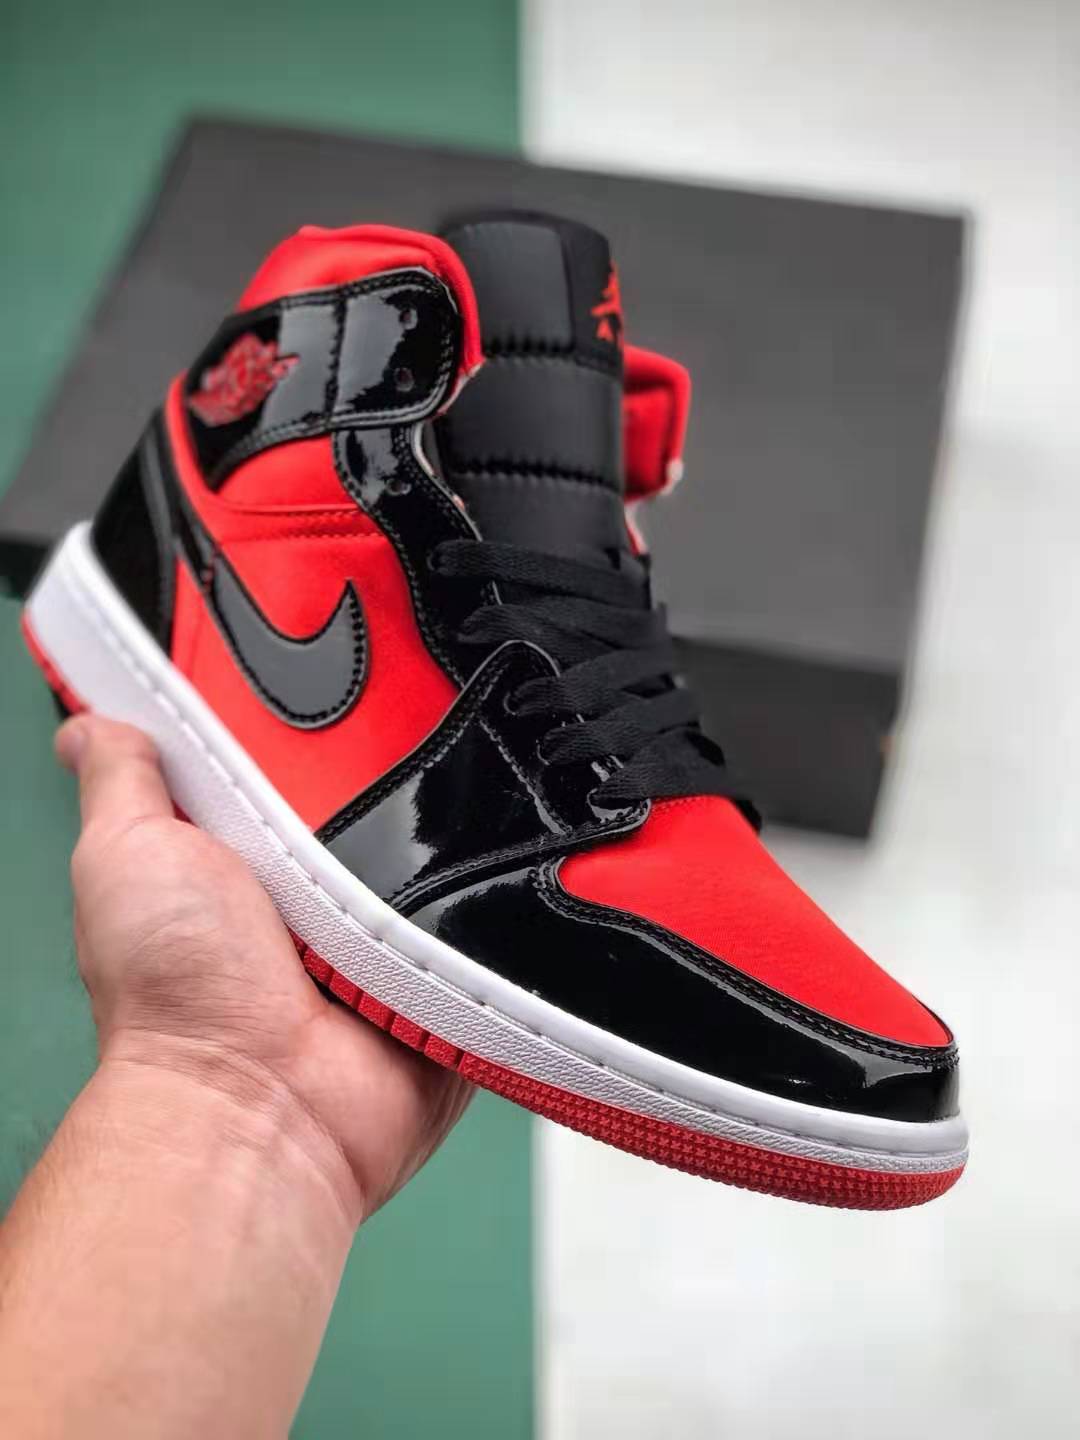 Air Jordan 1 Mid 'Hot Punch' Sneakers - BQ6472-600 | Limited Edition